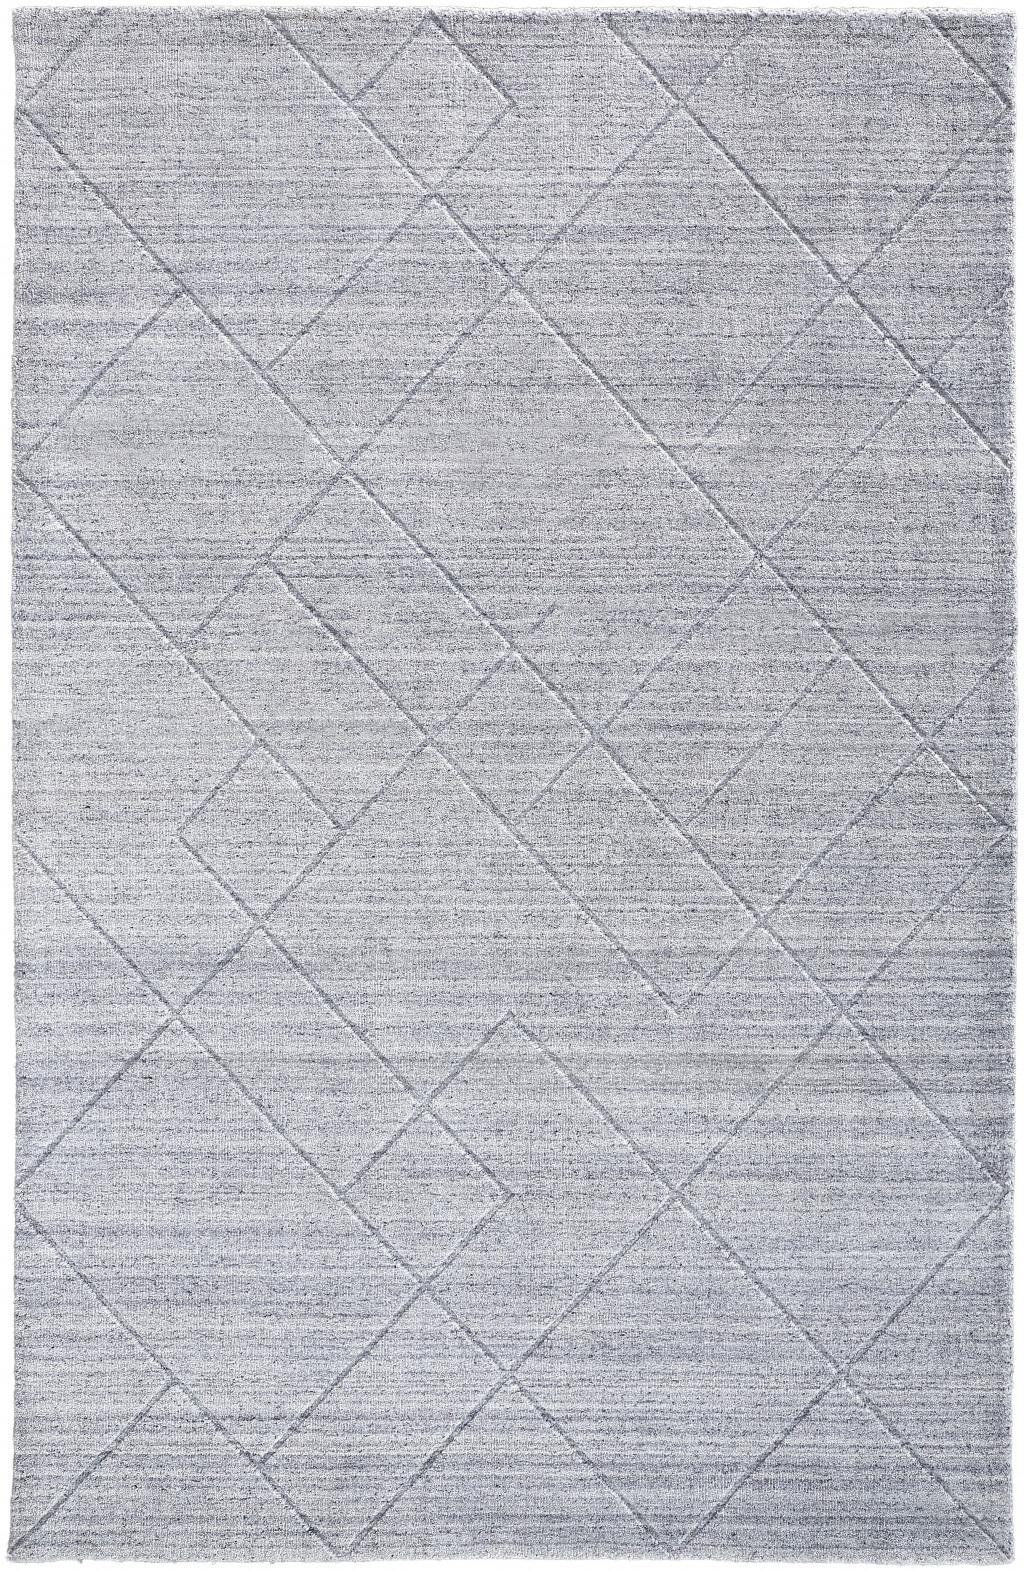 2' X 3' Gray And Silver Striped Hand Woven Area Rug-514797-1